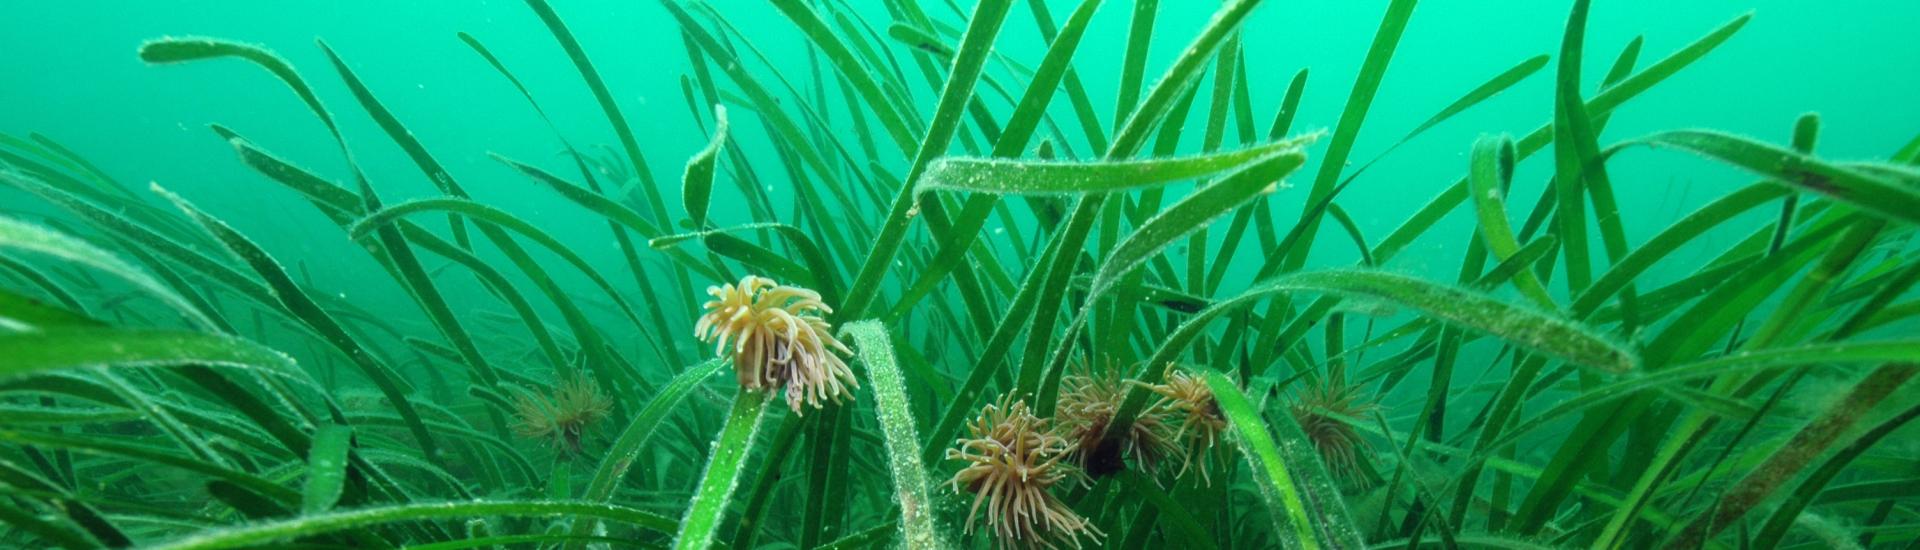 Anemone on seagrass